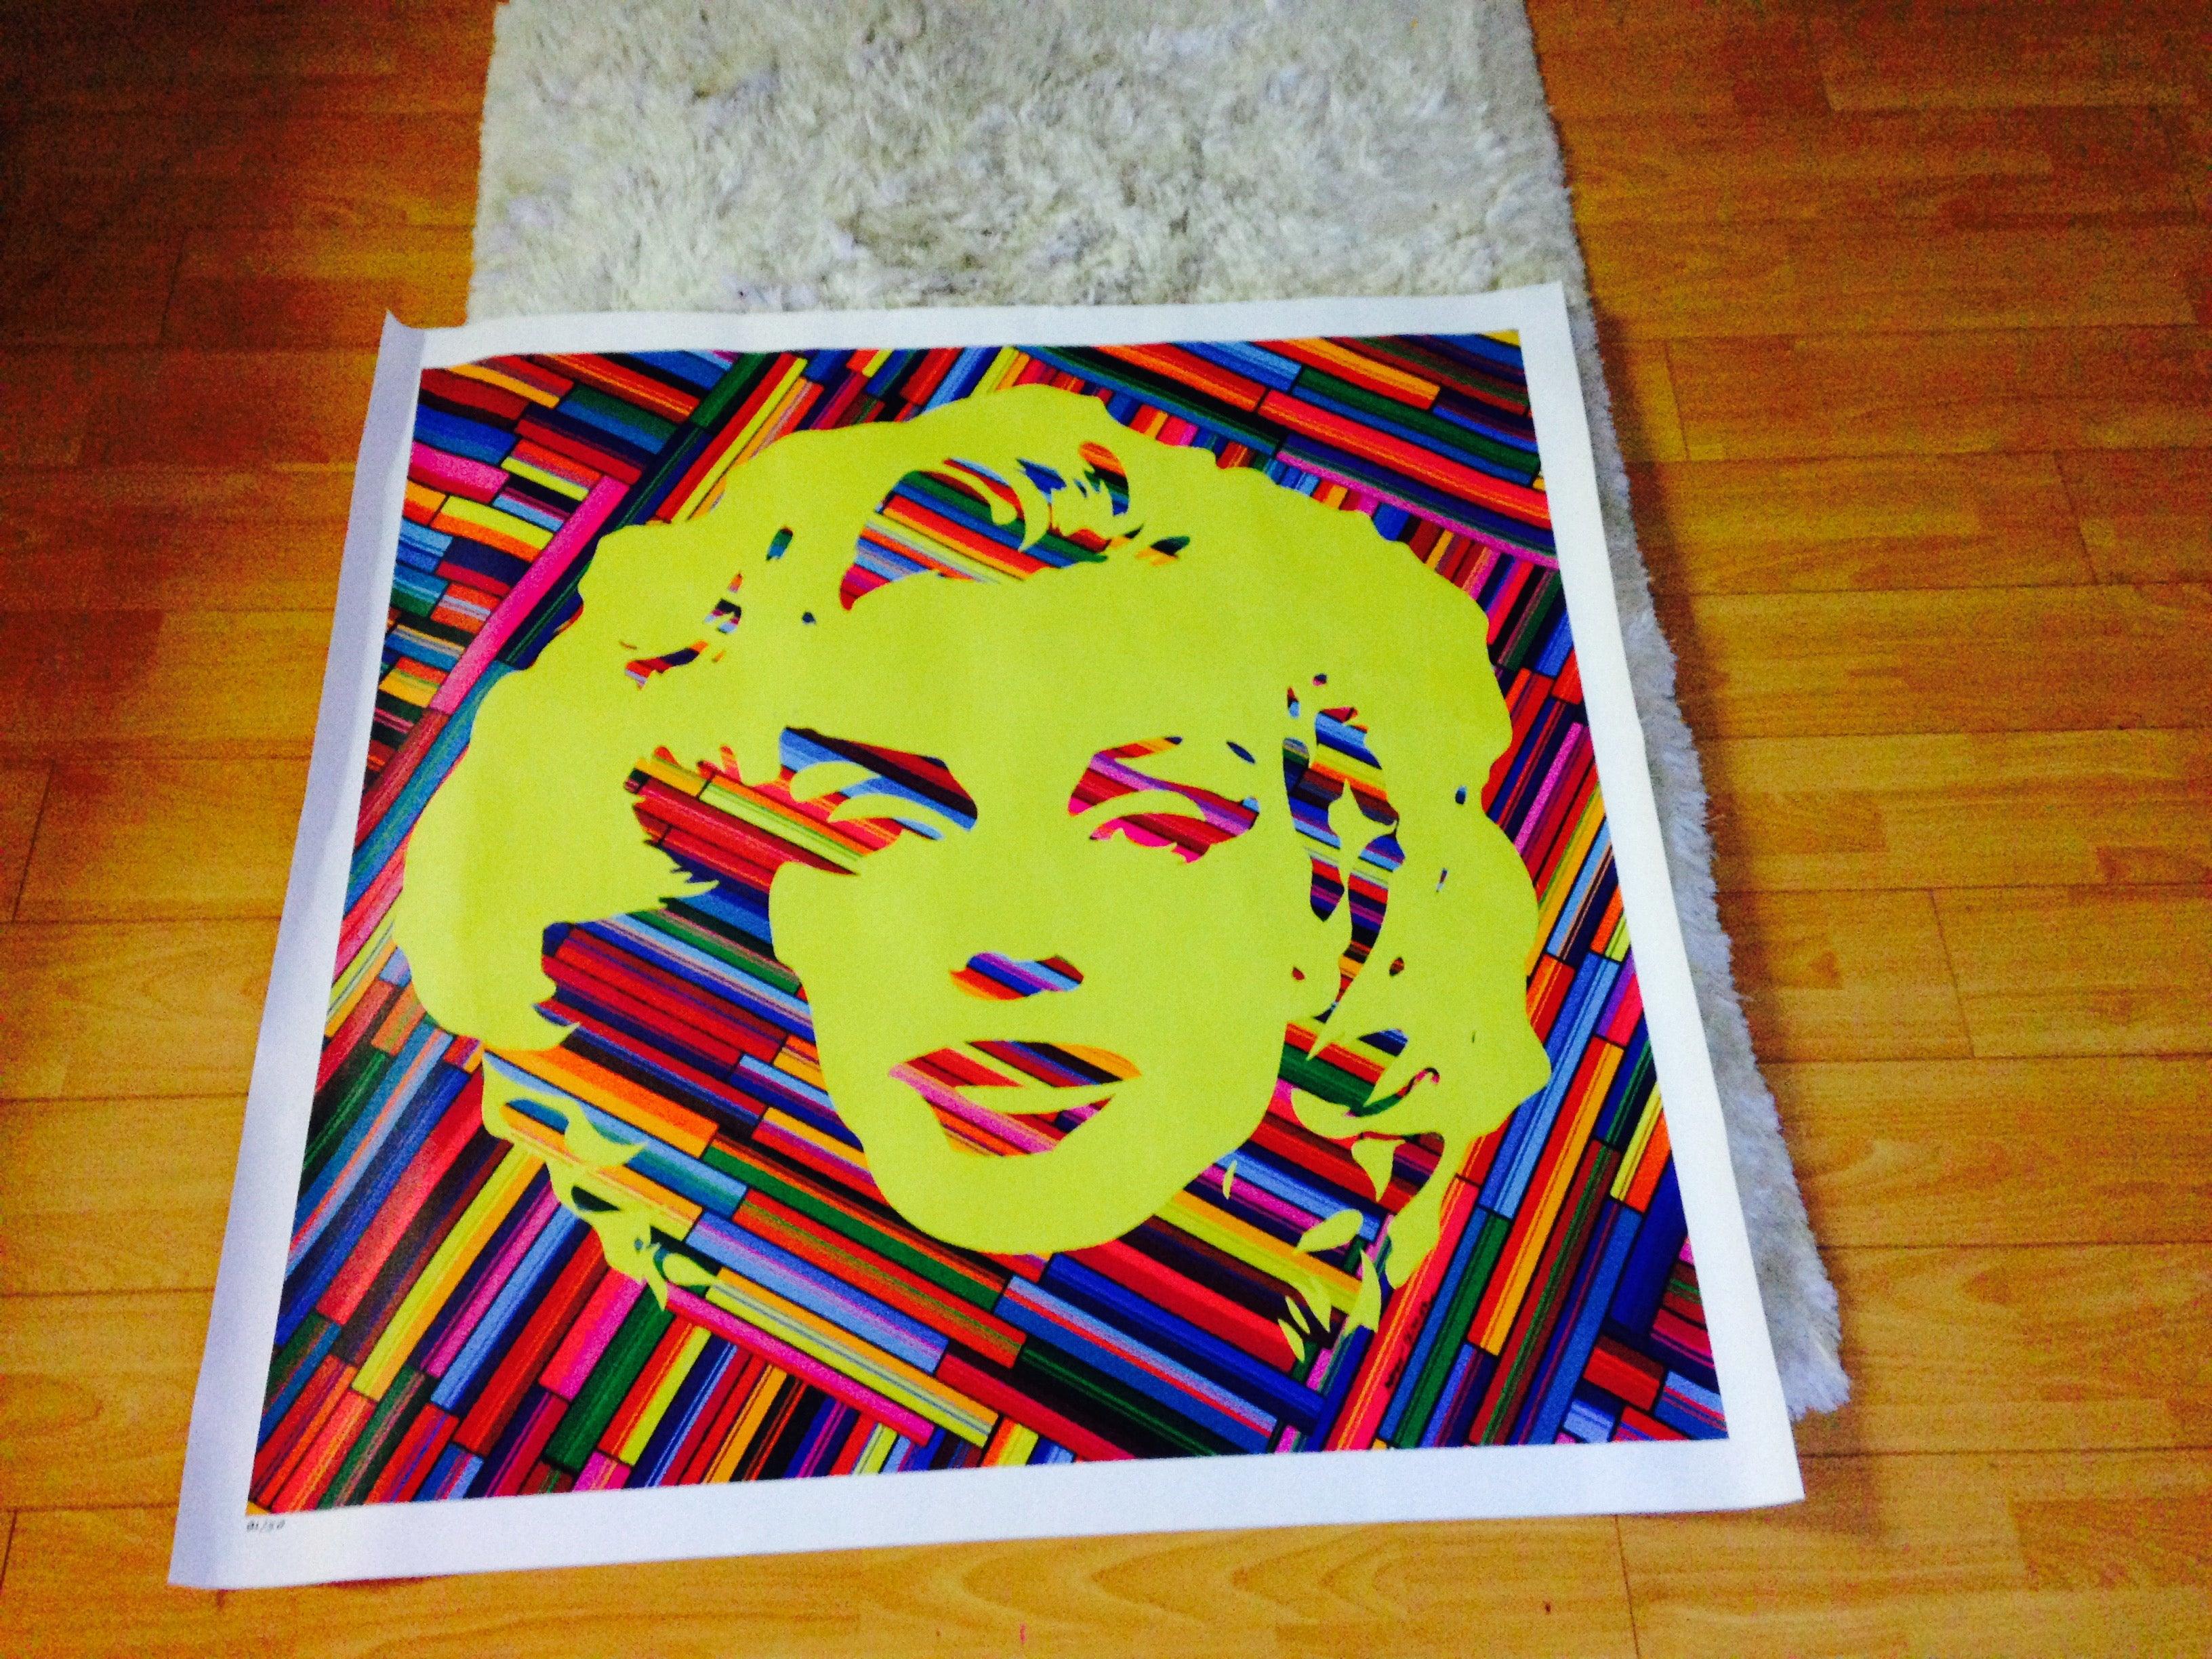 Celebrating the one and only Marilyn Monroe by Mauro Oliveira. 

Limited edition of 30 museum quality Giclee prints on CANVAS, signed and numbered by the artist.

A 